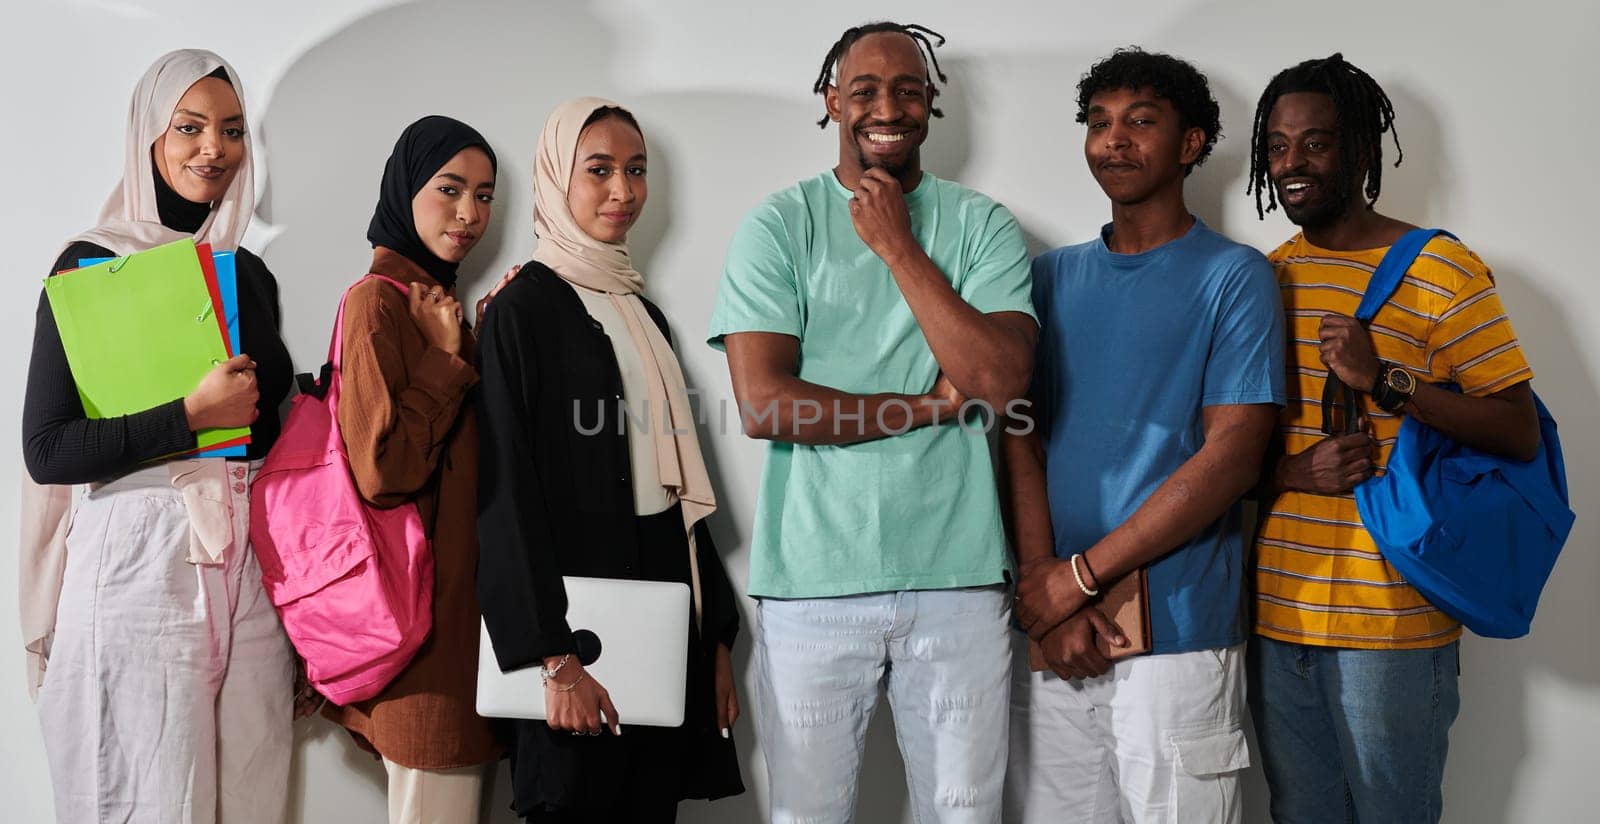 In a vibrant display of educational diversity, a group of students strikes a pose against a clean white background, holding backpacks, laptops, and tablets, symbolizing a blend of modern technology, unity, and cultural inclusivity in their academic journey by dotshock